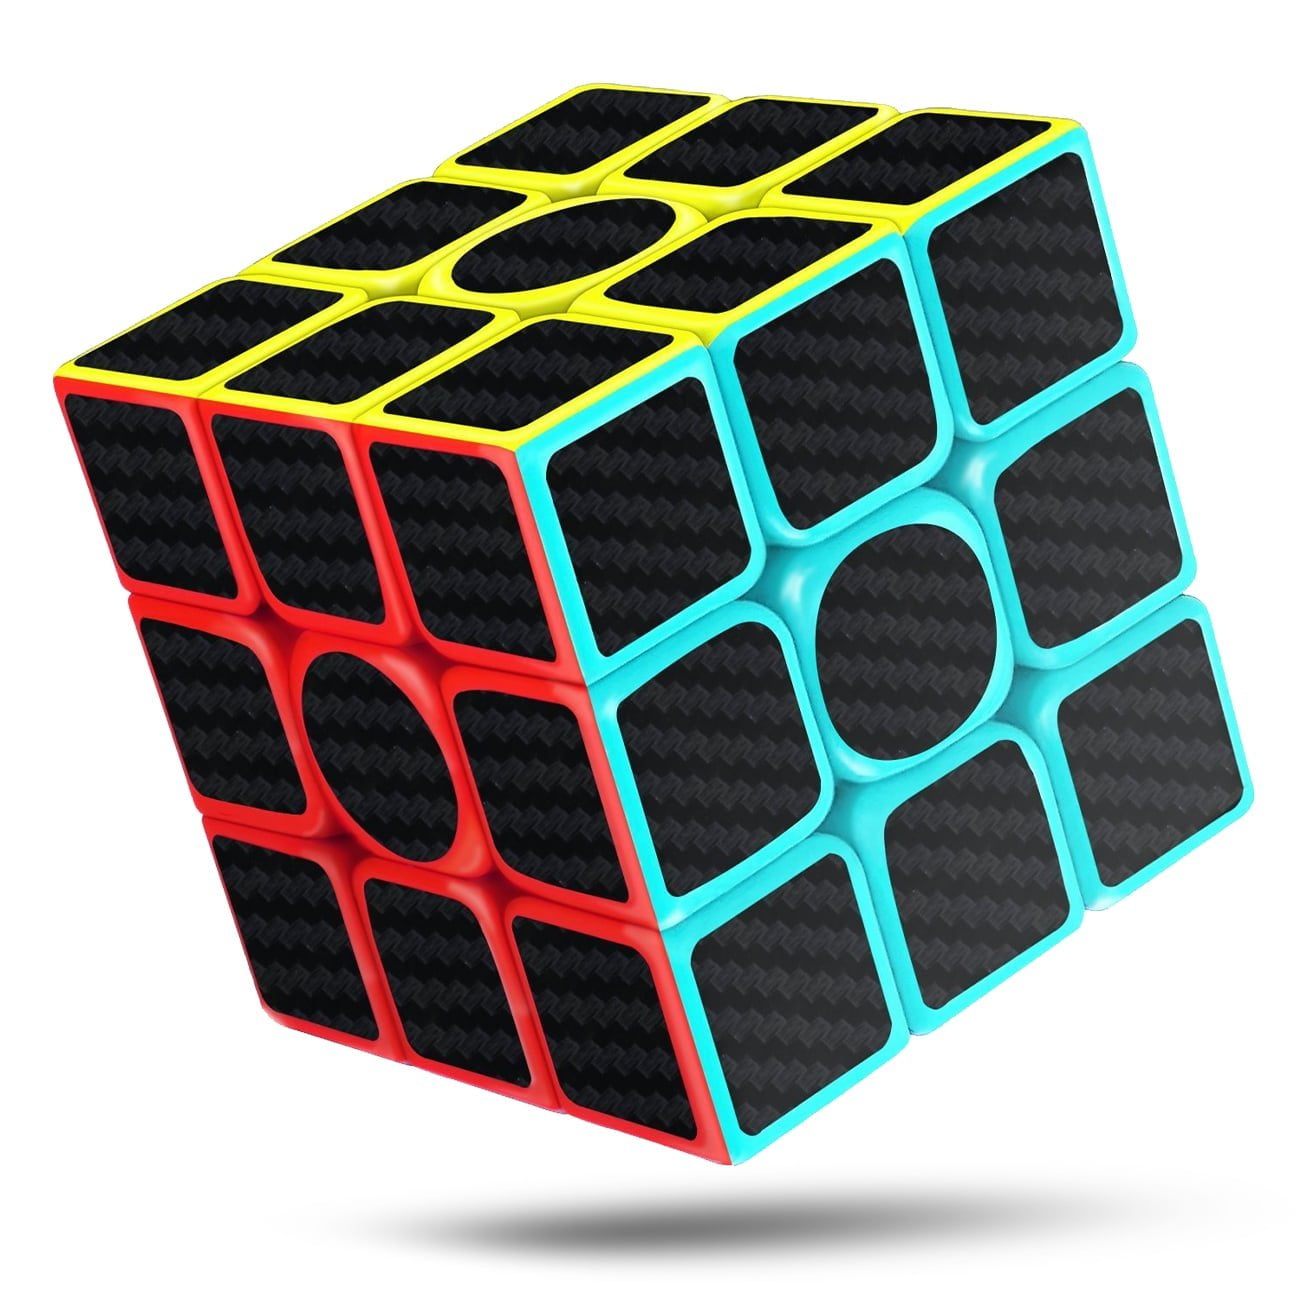 Magic Cube Ultra Smooth 3x3x3 With Black Carbon Fiber Sticker Speed 3x3 Puzzle for sale online 